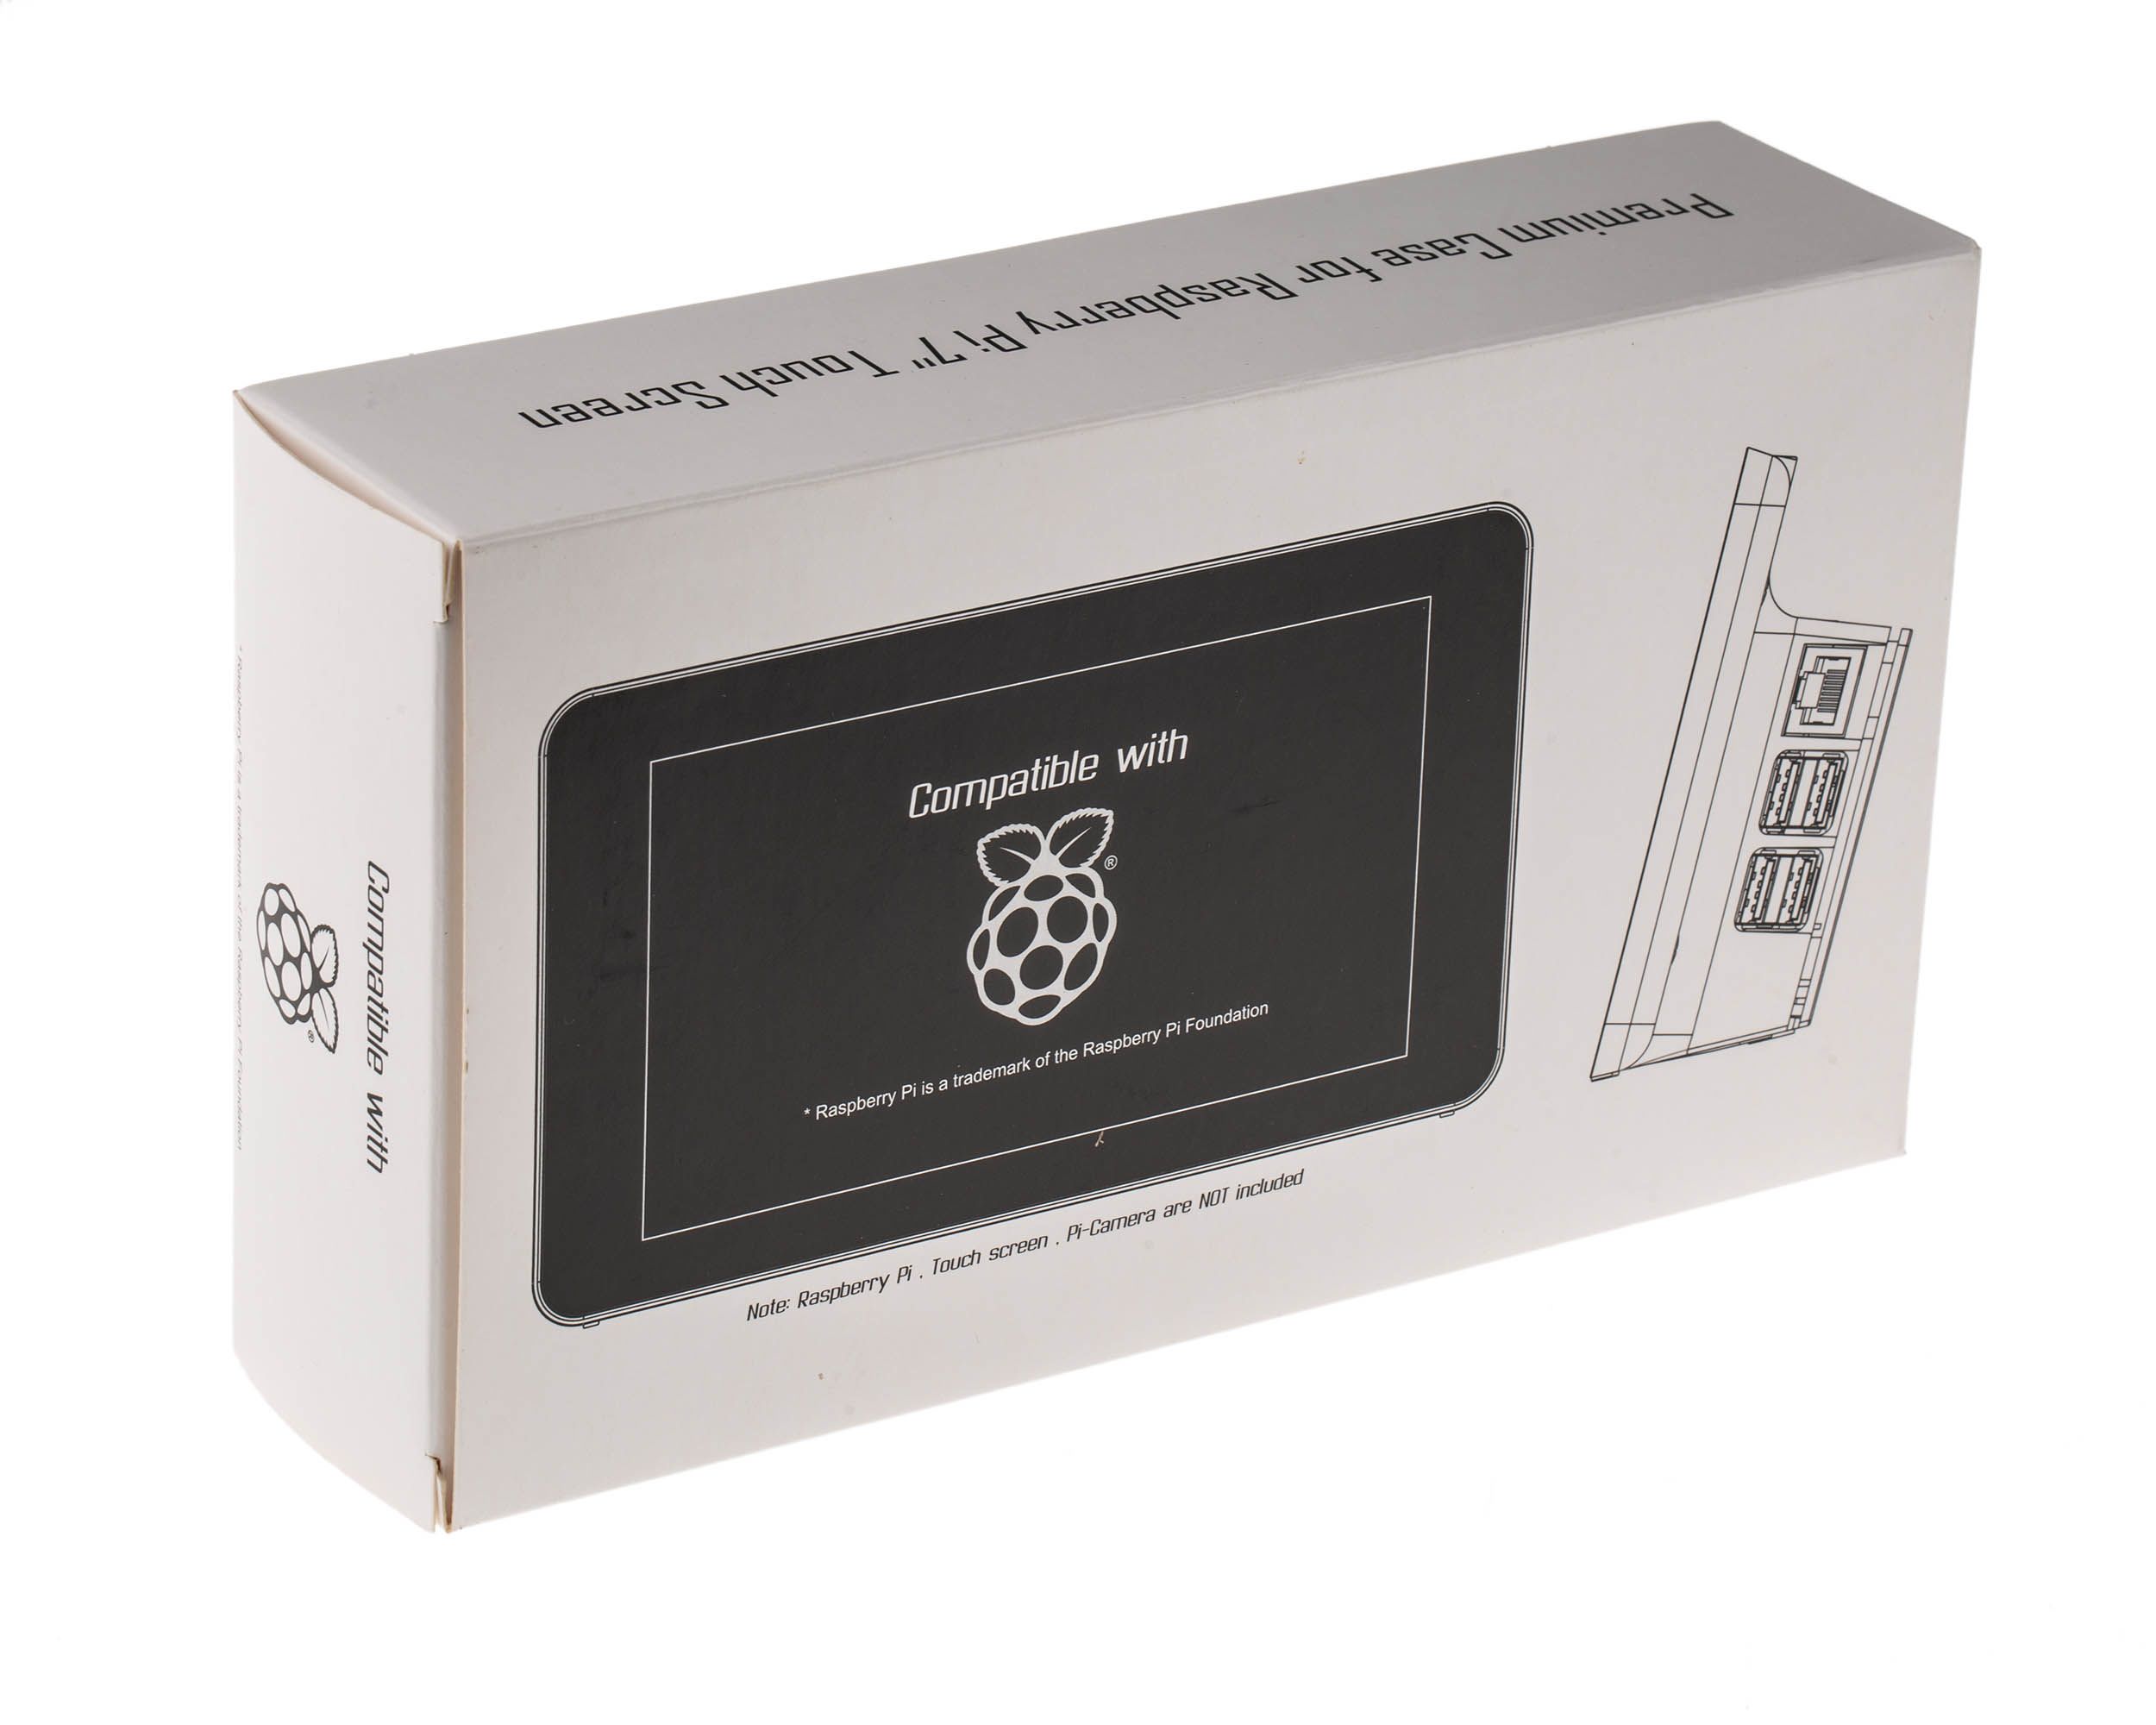 DesignSpark ABS  Case for use with Raspberry Pi 2B, Raspberry Pi 3B, Raspberry Pi 3B+, Raspberry Pi B+, Raspberry Pi